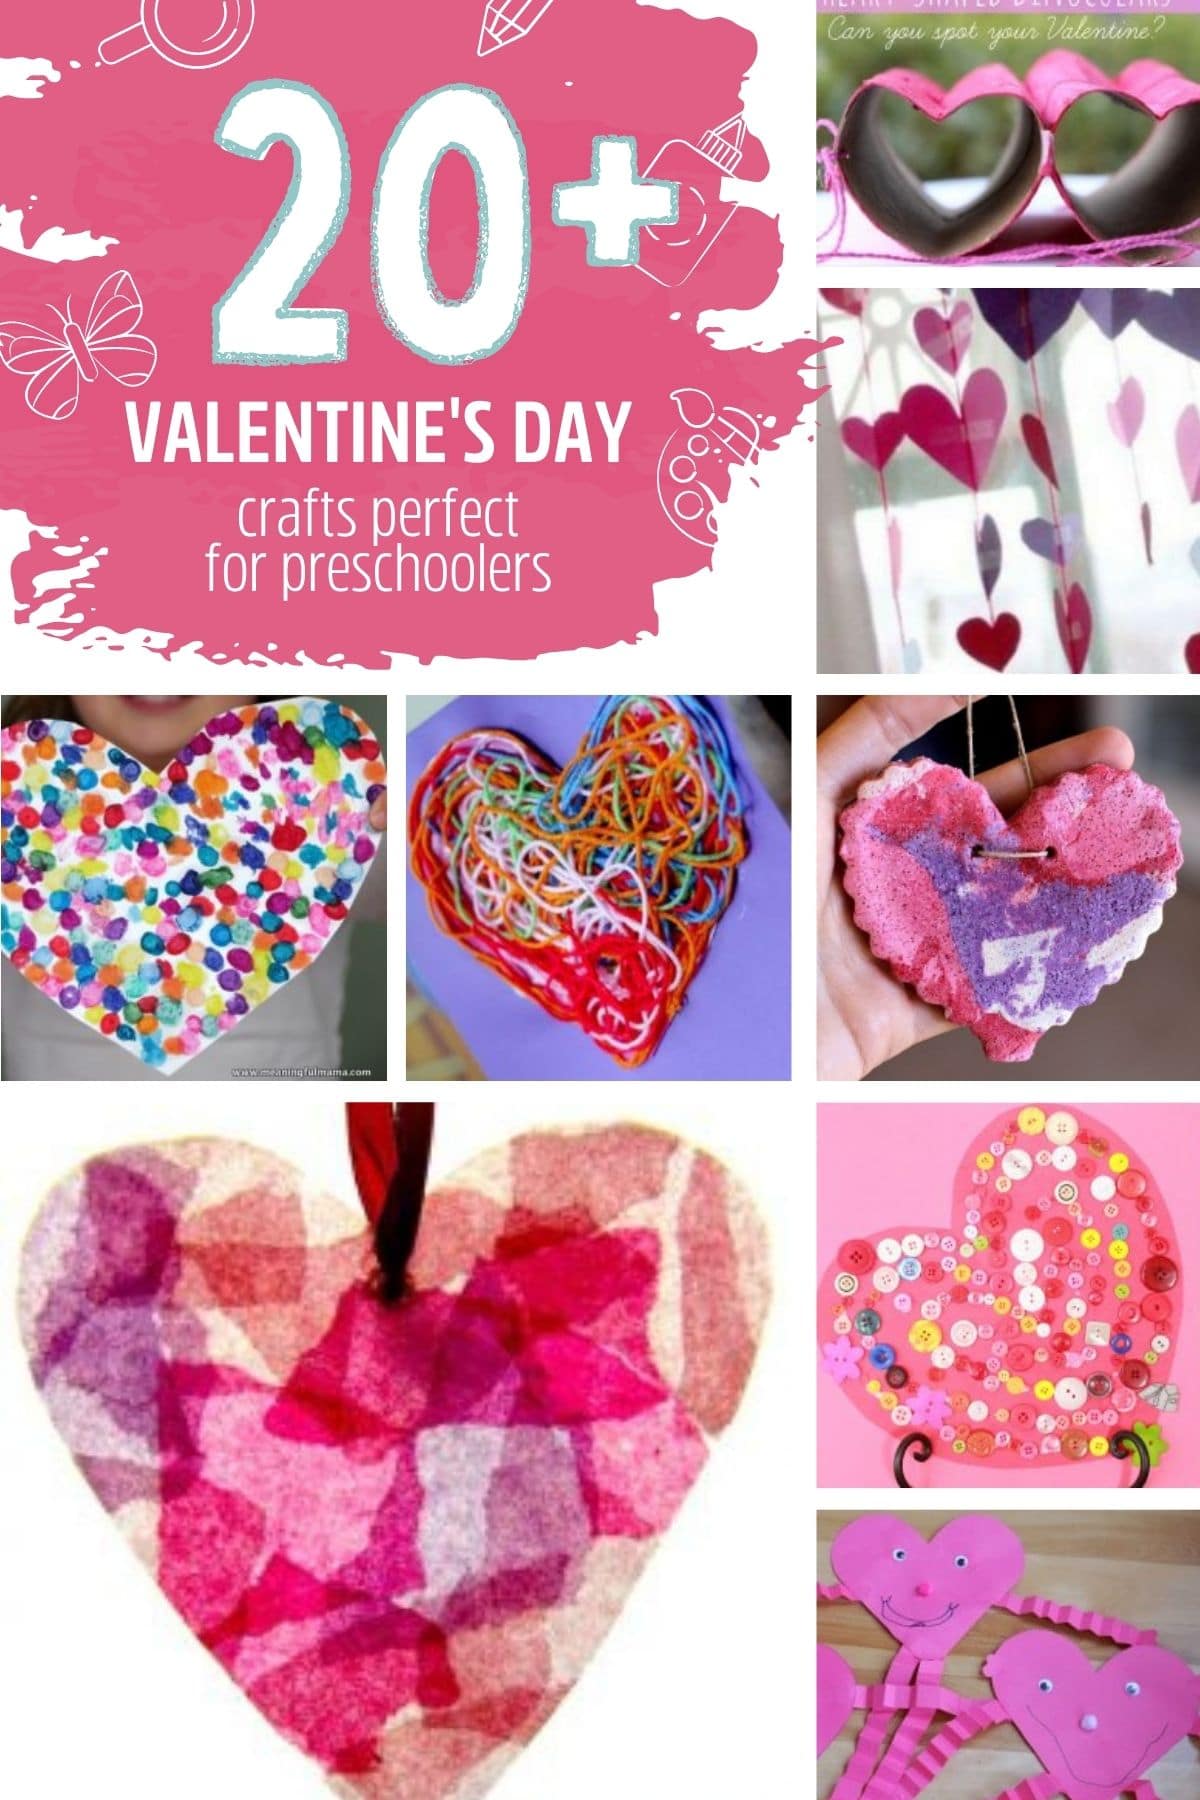 Valentine's Day Crafts for Kids & Adults